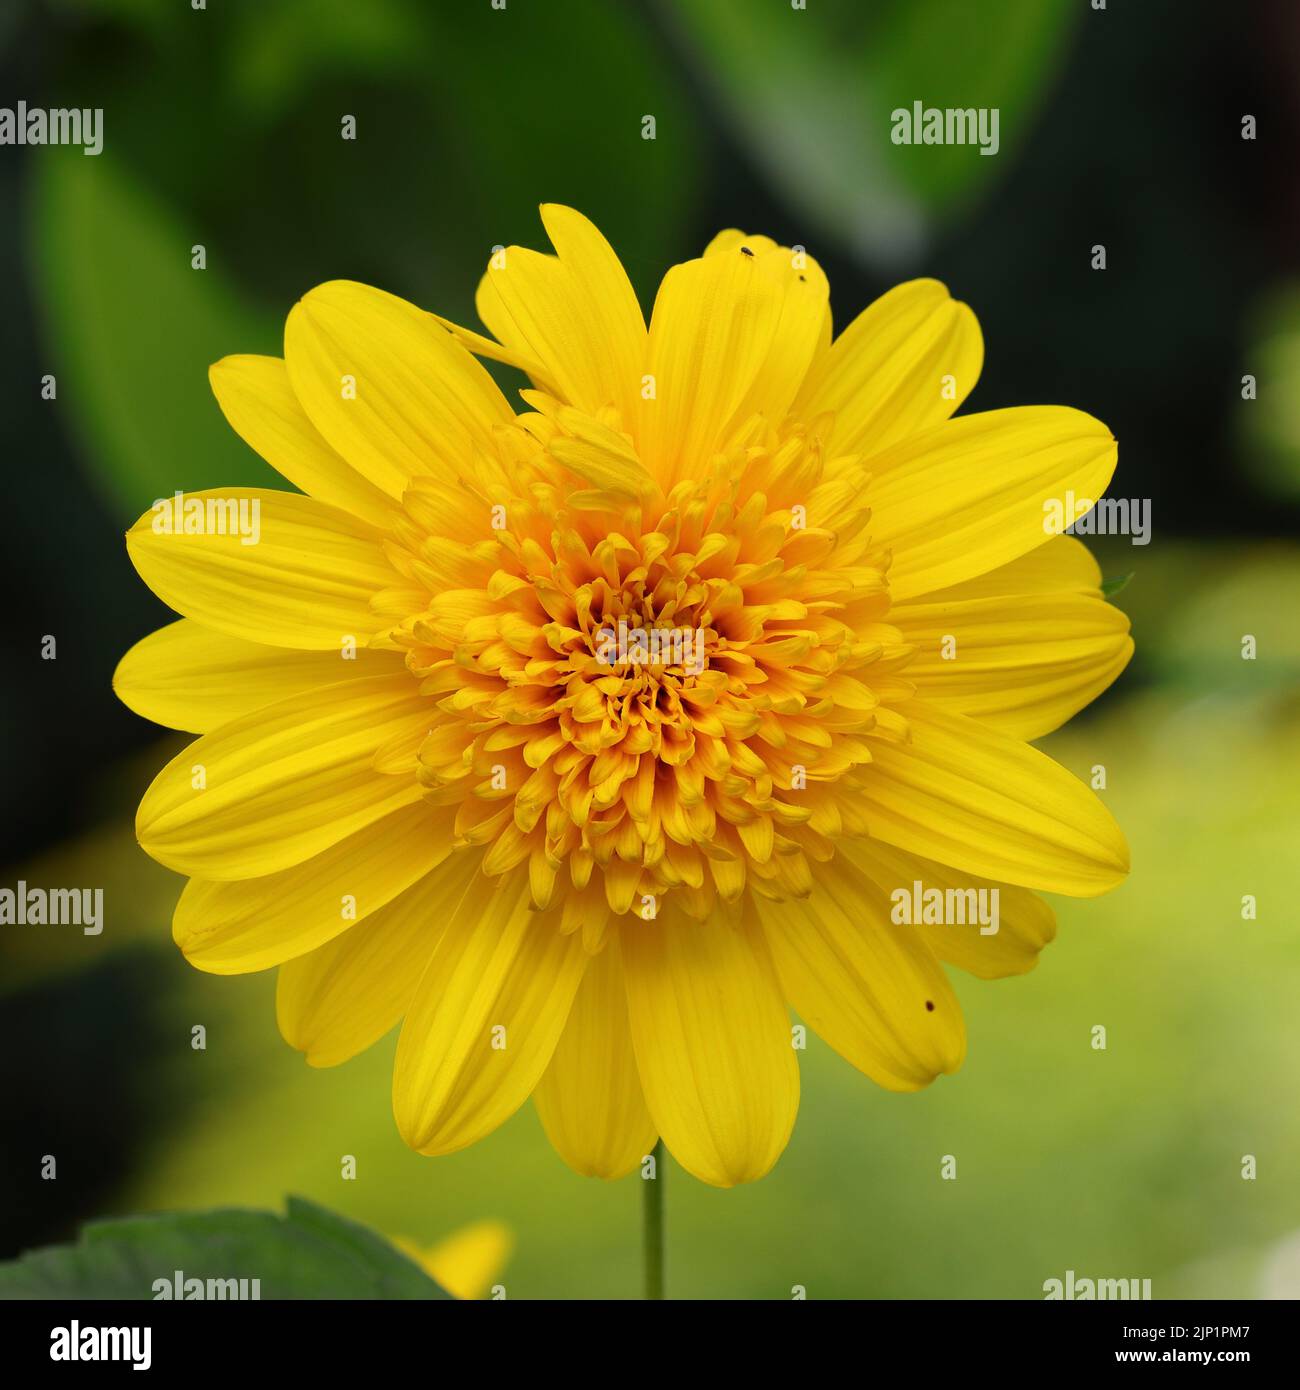 a beautiful helianthus x hybride flower with a filled flower center against a blurry background Stock Photo